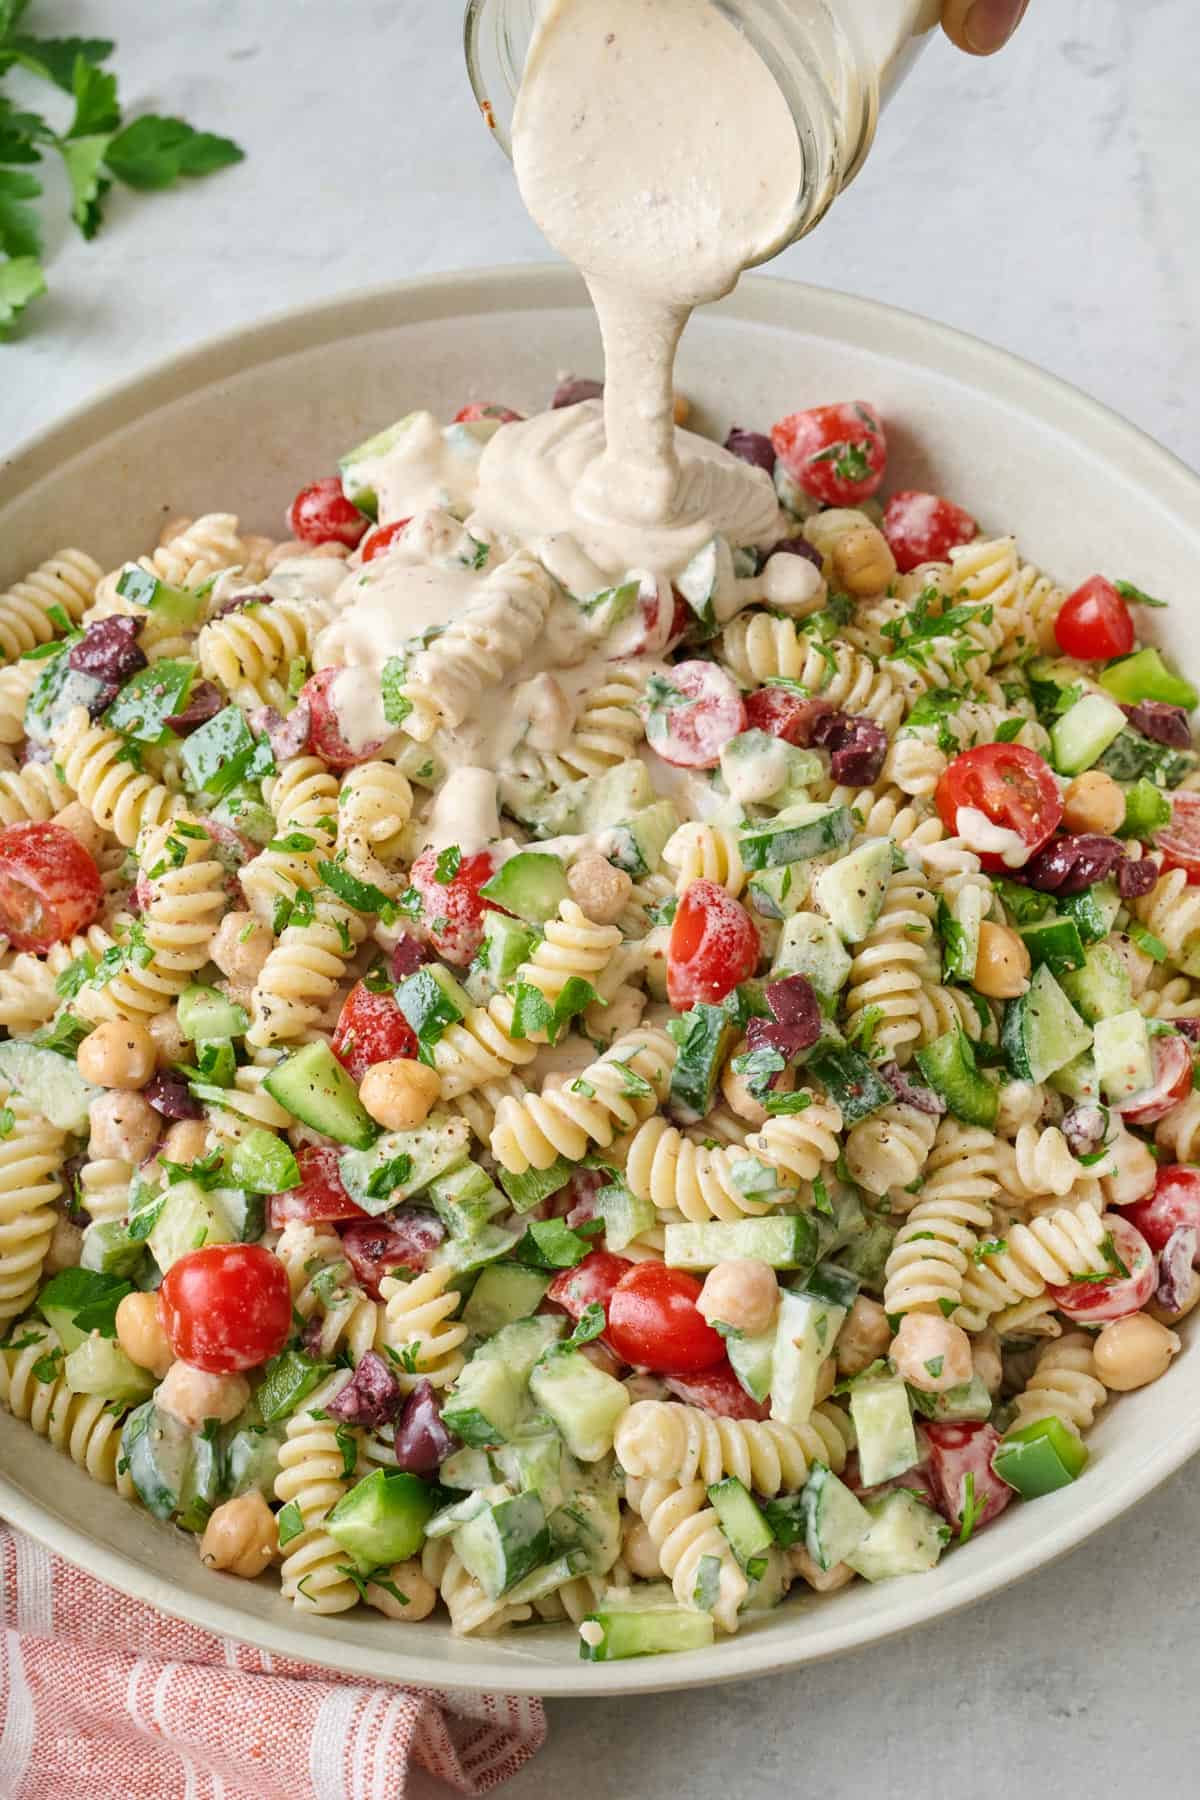 Tahini dressing being poured onto a big bowl of tahini pasta salad with tomatoes, cucumbers, bell pepper, chickpeas, and olives.